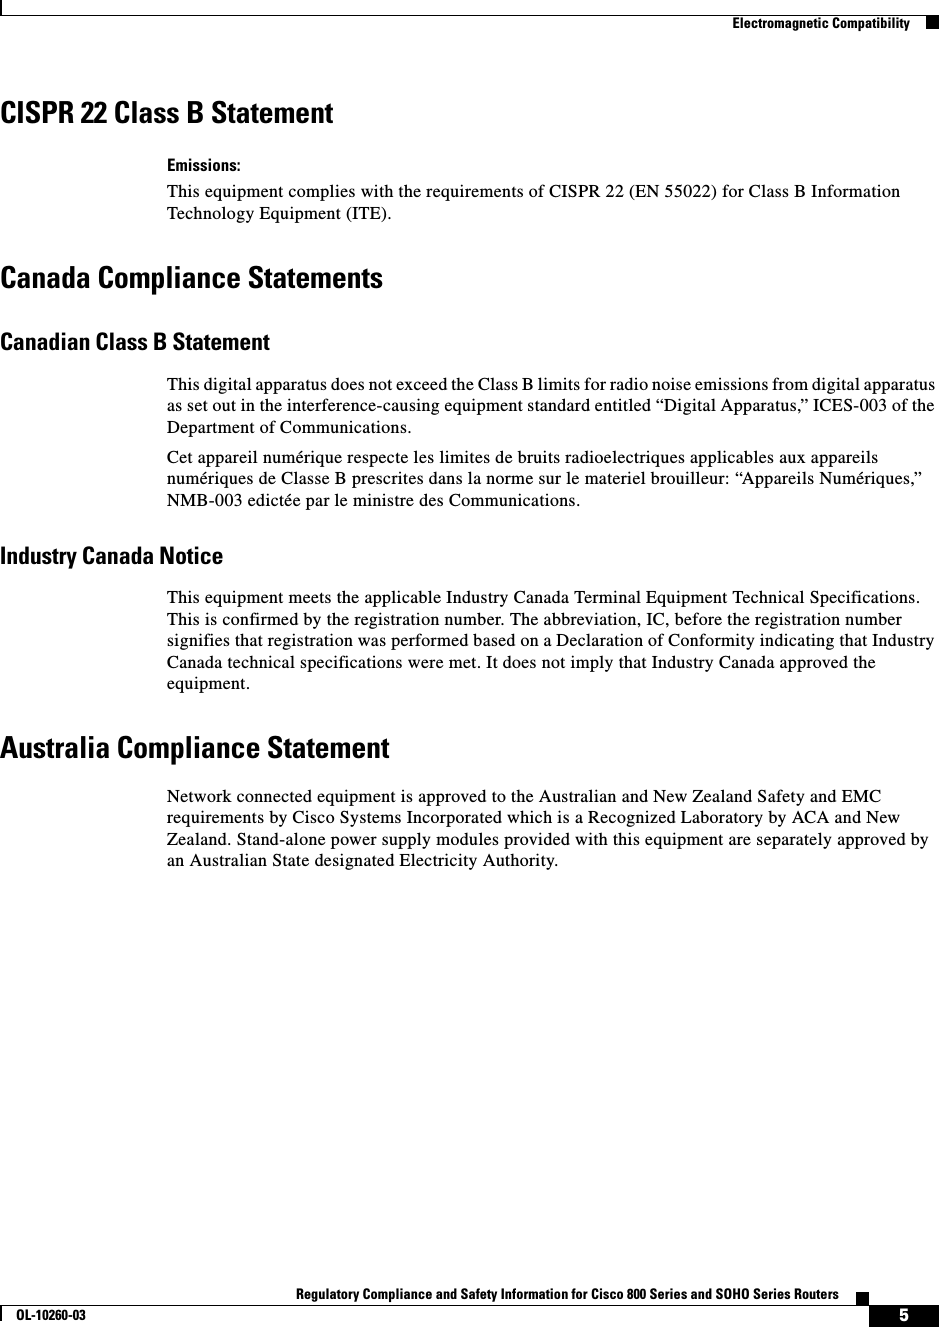  5Regulatory Compliance and Safety Information for Cisco 800 Series and SOHO Series RoutersOL-10260-03  Electromagnetic CompatibilityCISPR 22 Class B StatementEmissions:This equipment complies with the requirements of CISPR 22 (EN 55022) for Class B Information Technology Equipment (ITE).Canada Compliance StatementsCanadian Class B StatementThis digital apparatus does not exceed the Class B limits for radio noise emissions from digital apparatus as set out in the interference-causing equipment standard entitled “Digital Apparatus,” ICES-003 of the Department of Communications.Cet appareil numérique respecte les limites de bruits radioelectriques applicables aux appareils numériques de Classe B prescrites dans la norme sur le materiel brouilleur: “Appareils Numériques,” NMB-003 edictée par le ministre des Communications.Industry Canada NoticeThis equipment meets the applicable Industry Canada Terminal Equipment Technical Specifications. This is confirmed by the registration number. The abbreviation, IC, before the registration number signifies that registration was performed based on a Declaration of Conformity indicating that Industry Canada technical specifications were met. It does not imply that Industry Canada approved the equipment.Australia Compliance StatementNetwork connected equipment is approved to the Australian and New Zealand Safety and EMC requirements by Cisco Systems Incorporated which is a Recognized Laboratory by ACA and New Zealand. Stand-alone power supply modules provided with this equipment are separately approved by an Australian State designated Electricity Authority.